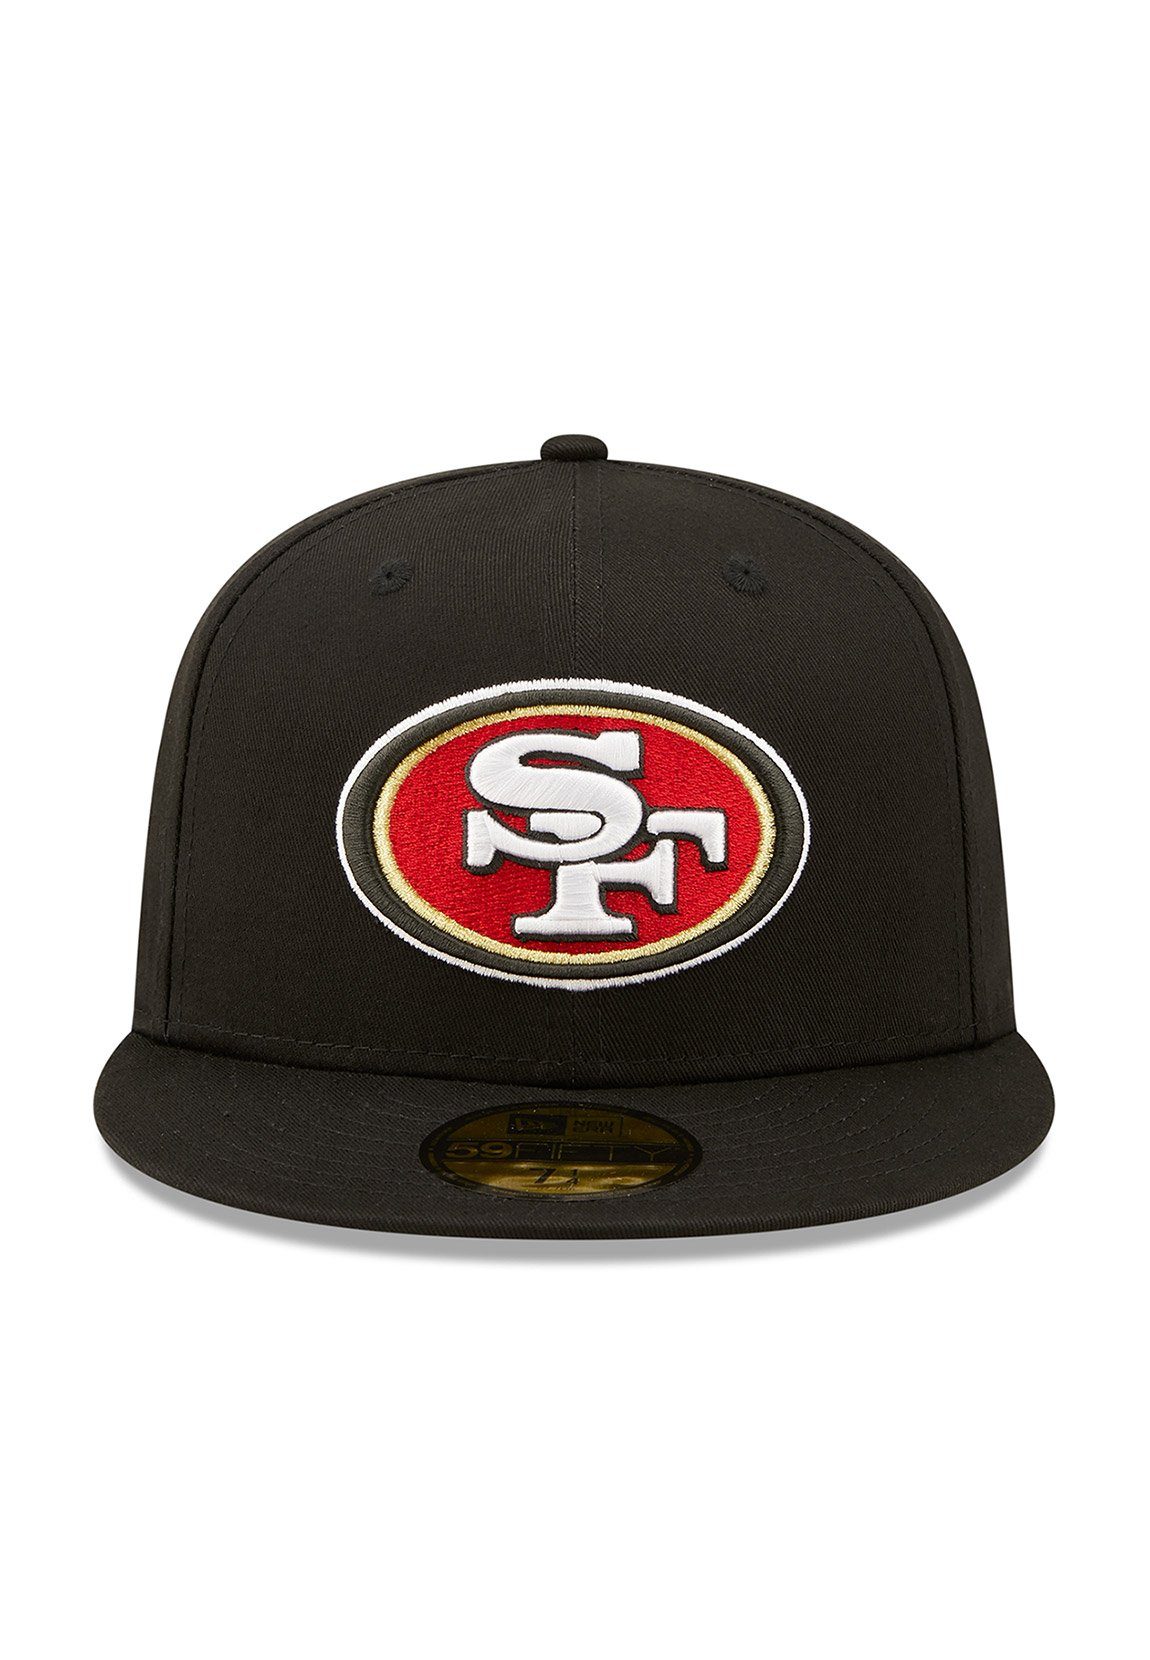 New Patch 49ers Cap Fitted Schwarz FRANCISCO Side 59Fifty New Era SAN